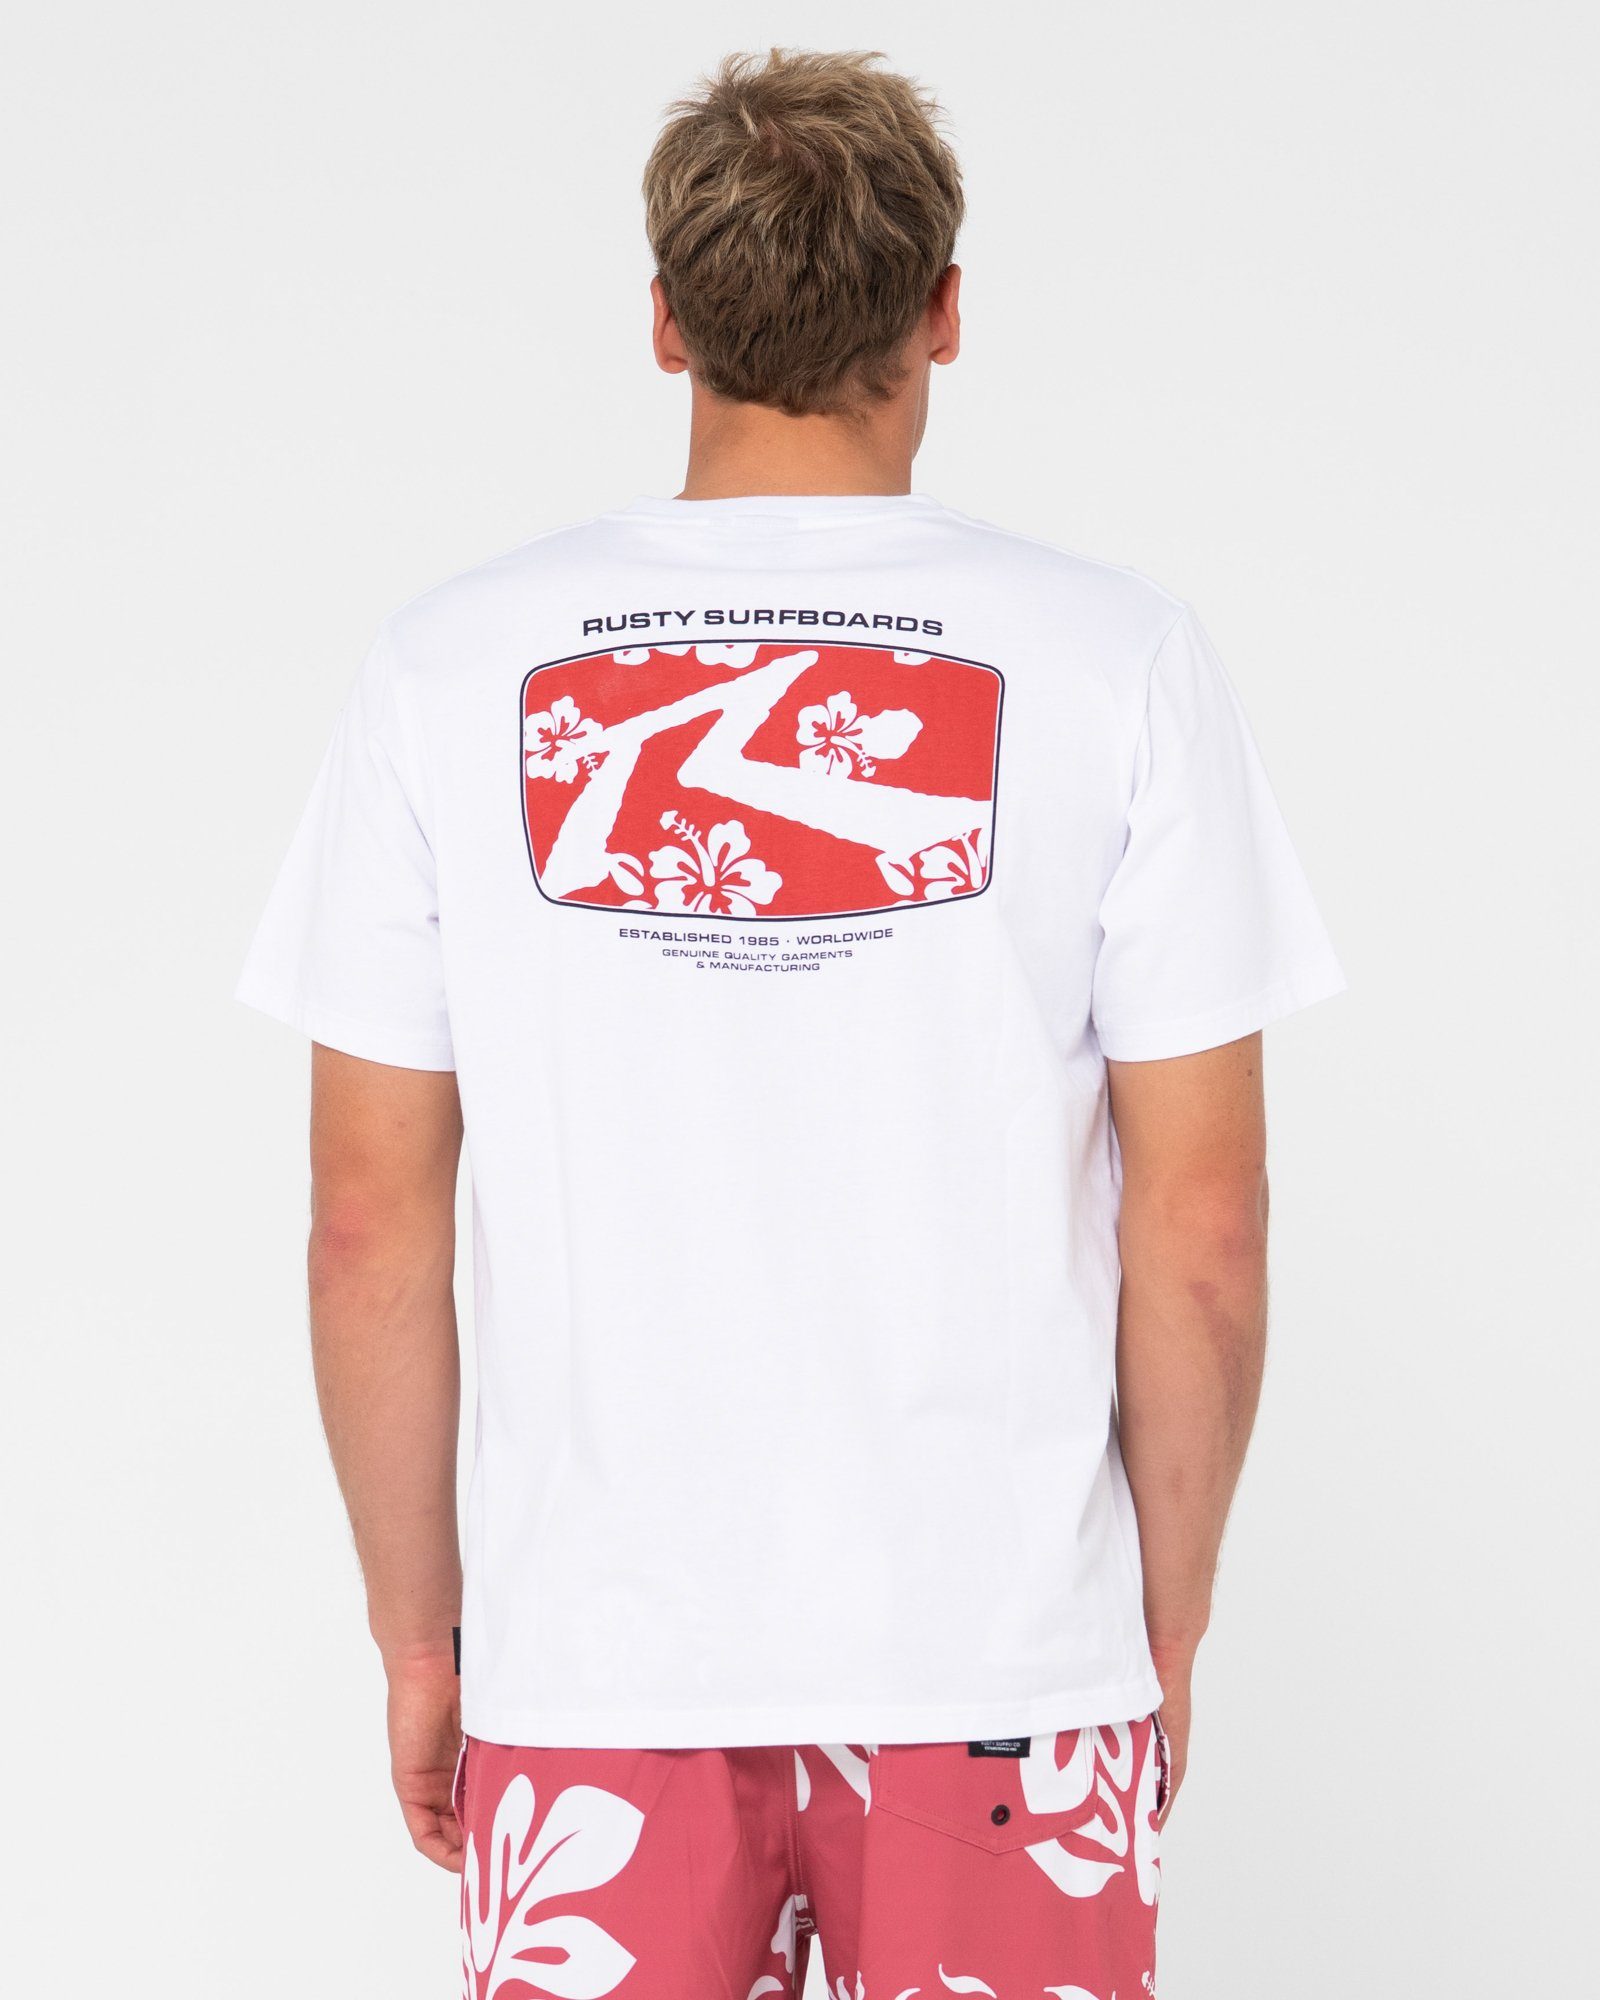 SLEEVE TEE White ADVOCATE Rusty Red SHORT / T-Shirt